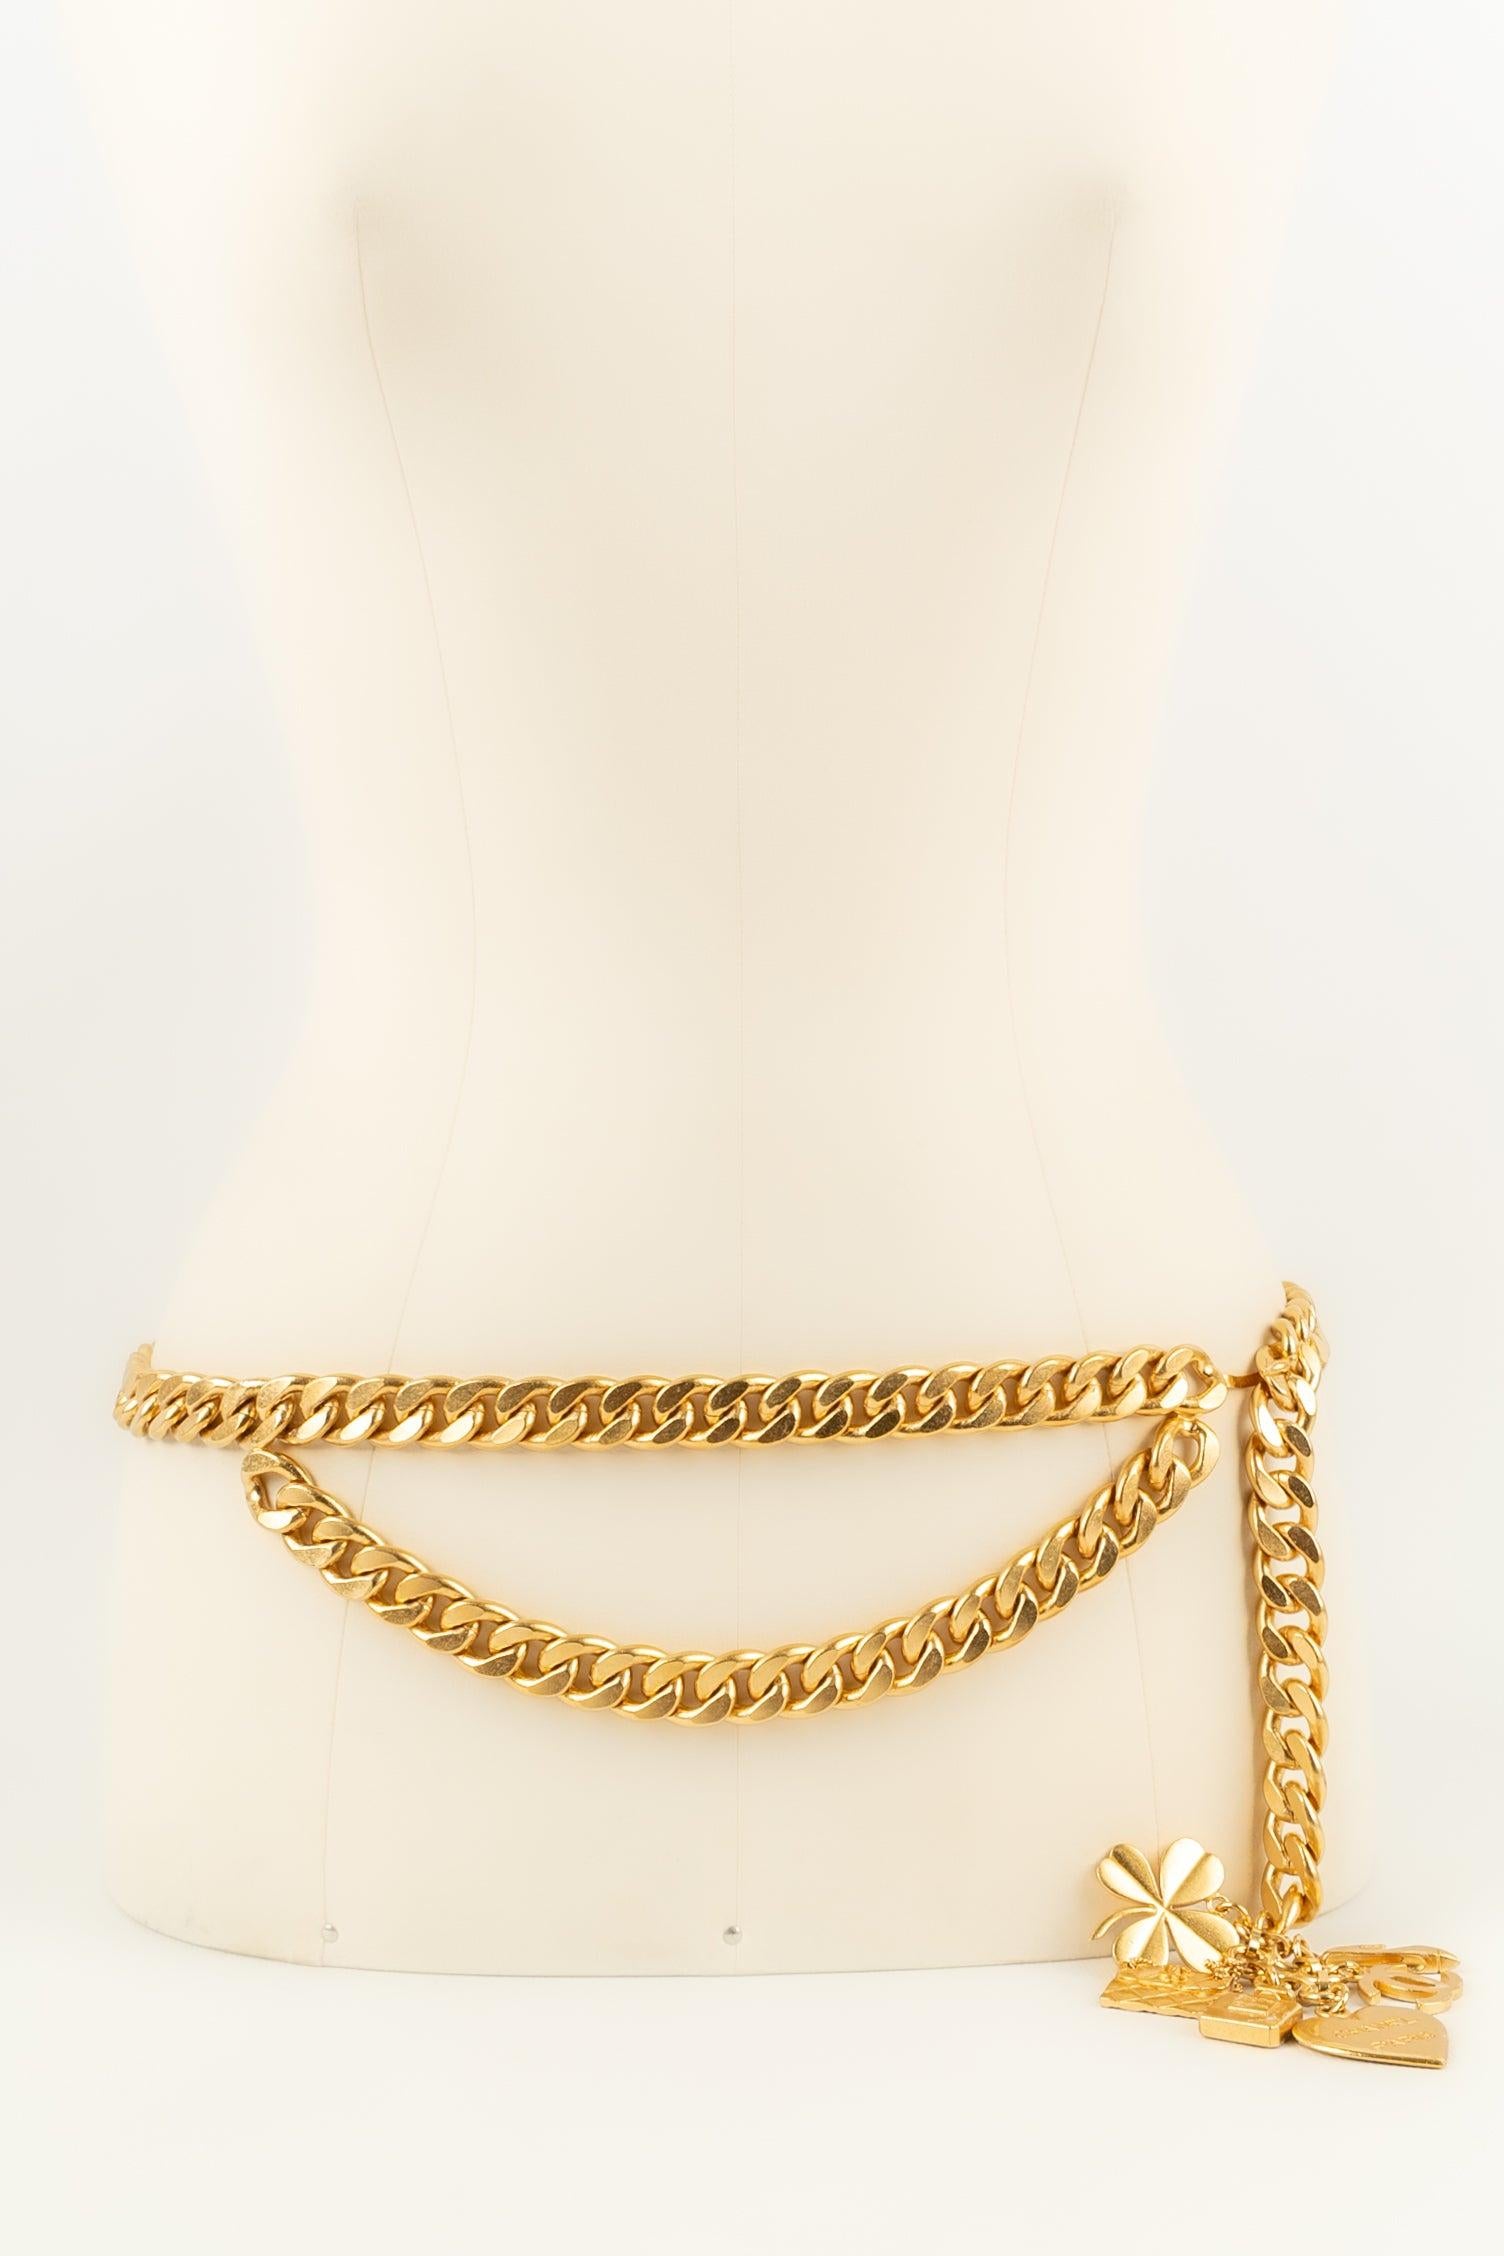 Chanel Belt Composed of Chains in Gold-Plated Metal, 1995 For Sale 3